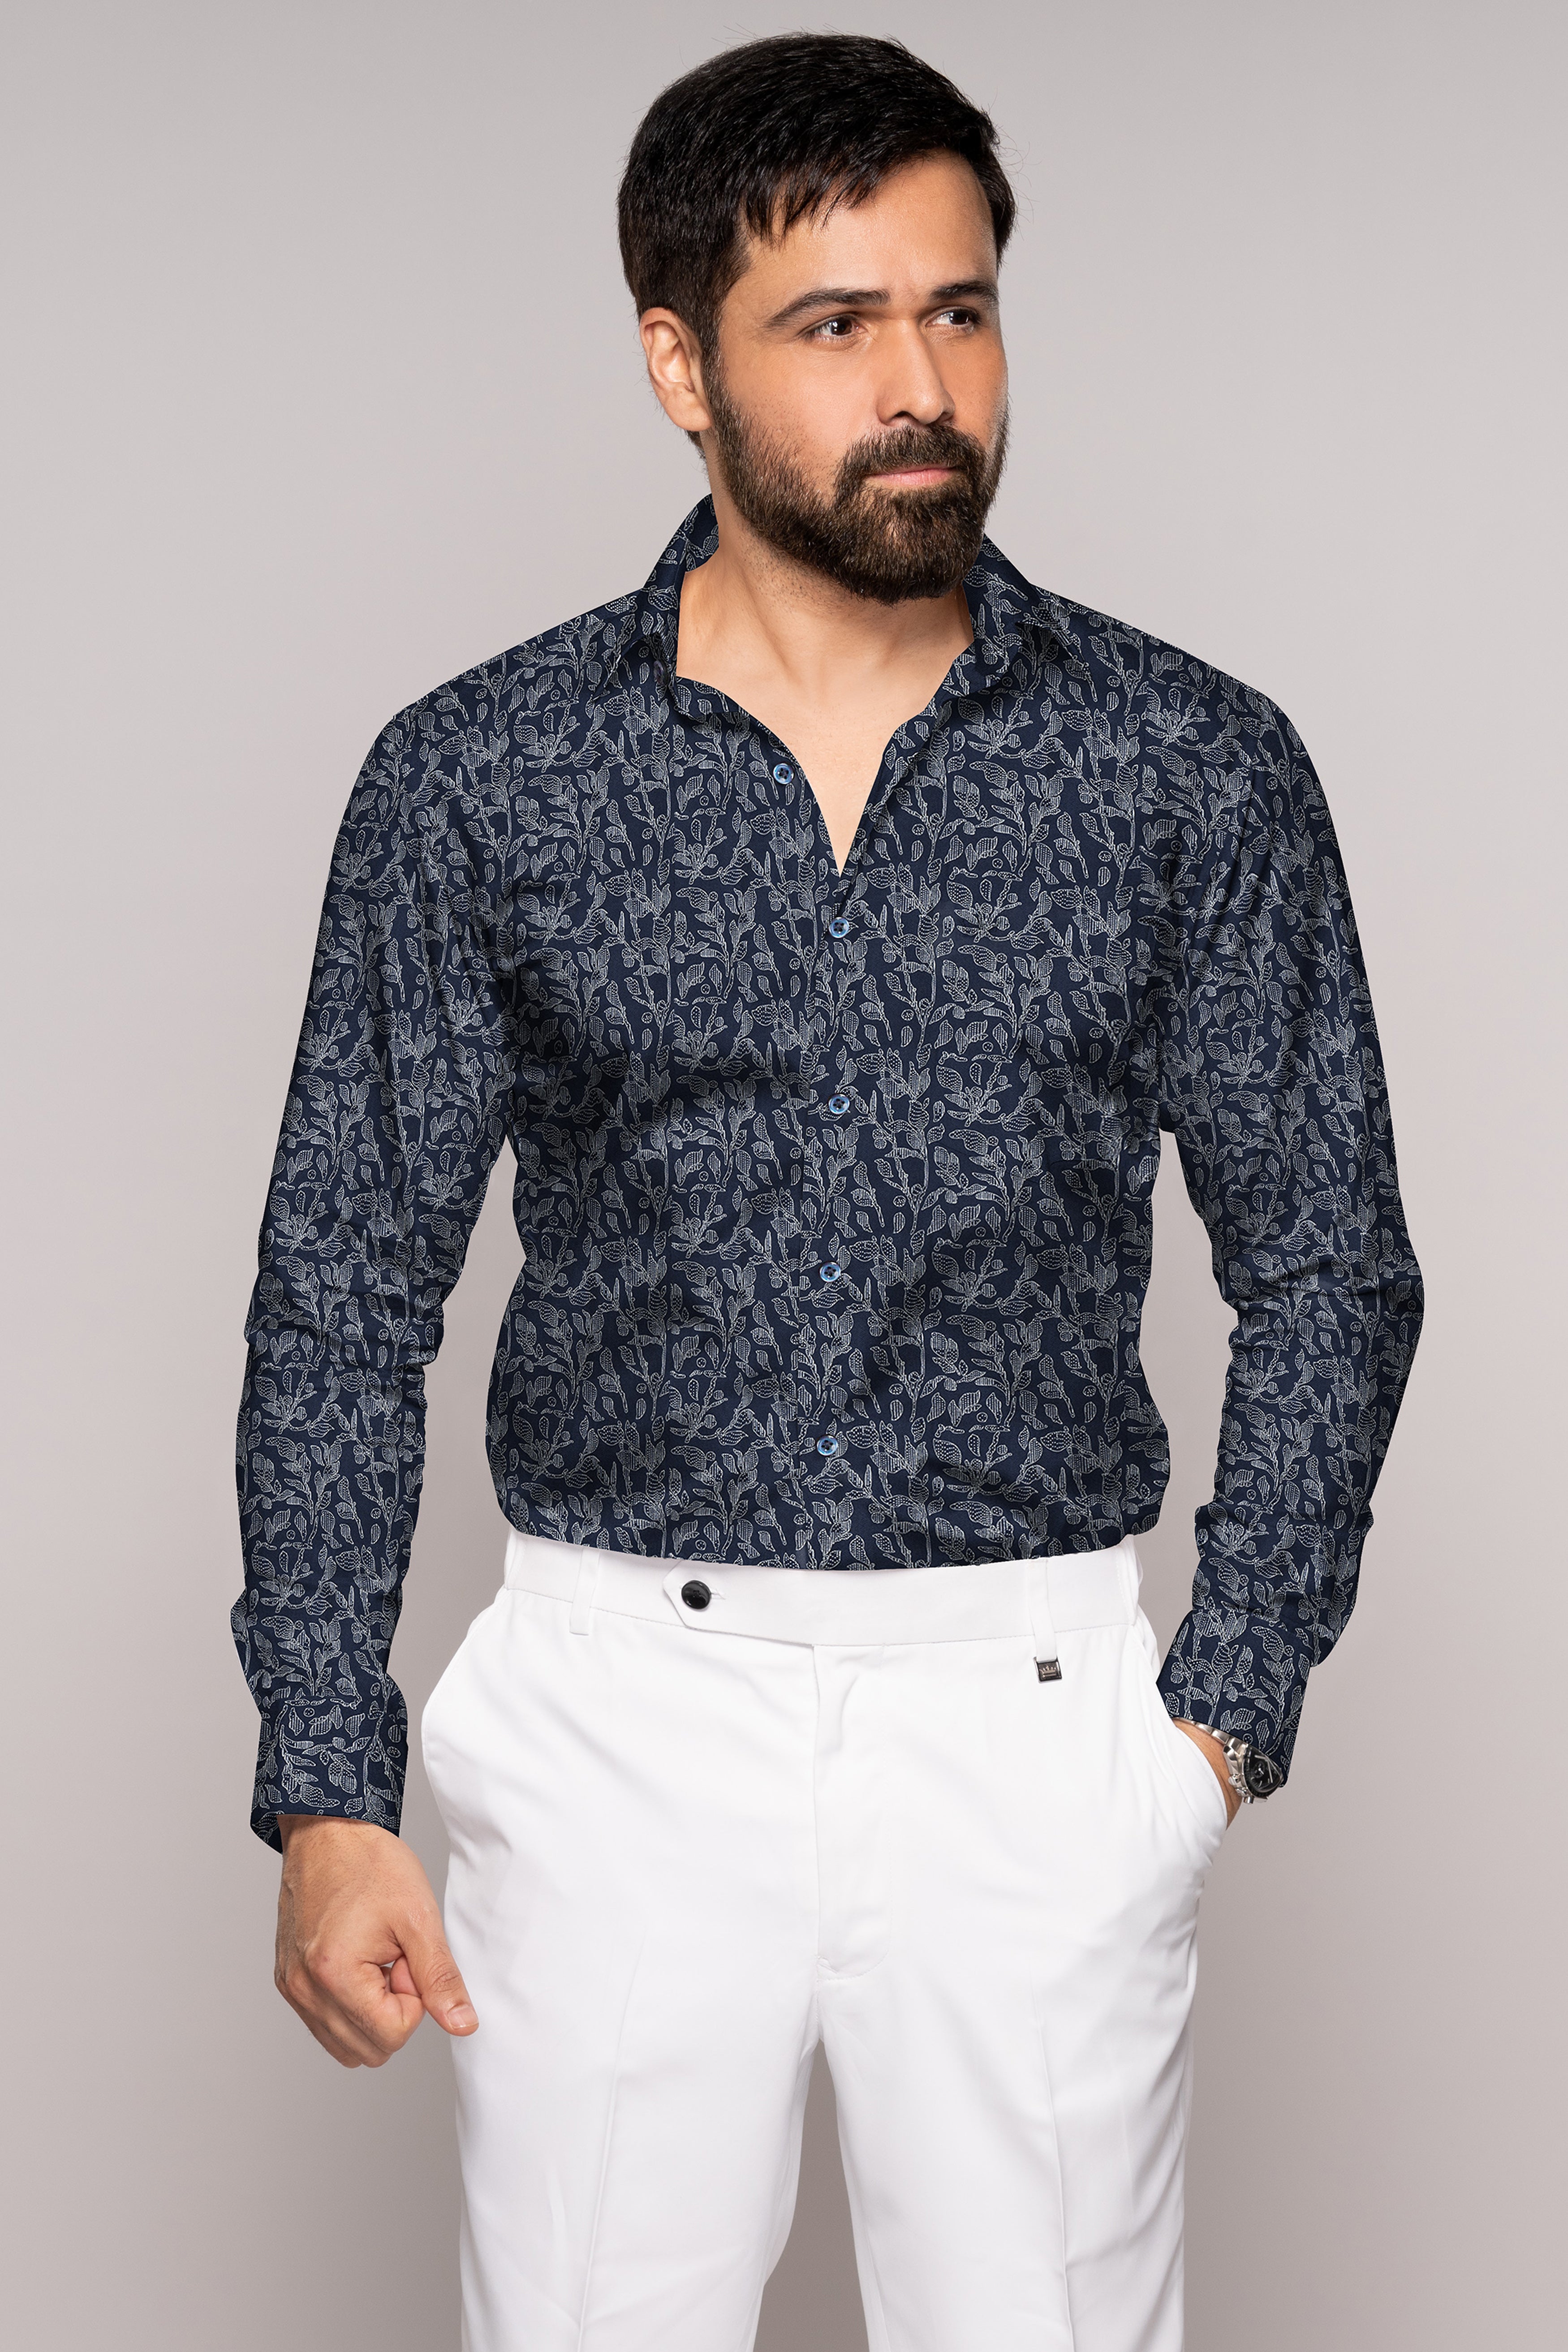 Ebony Clay Blue with Leaves Printed Super Soft Premium Cotton Shirt